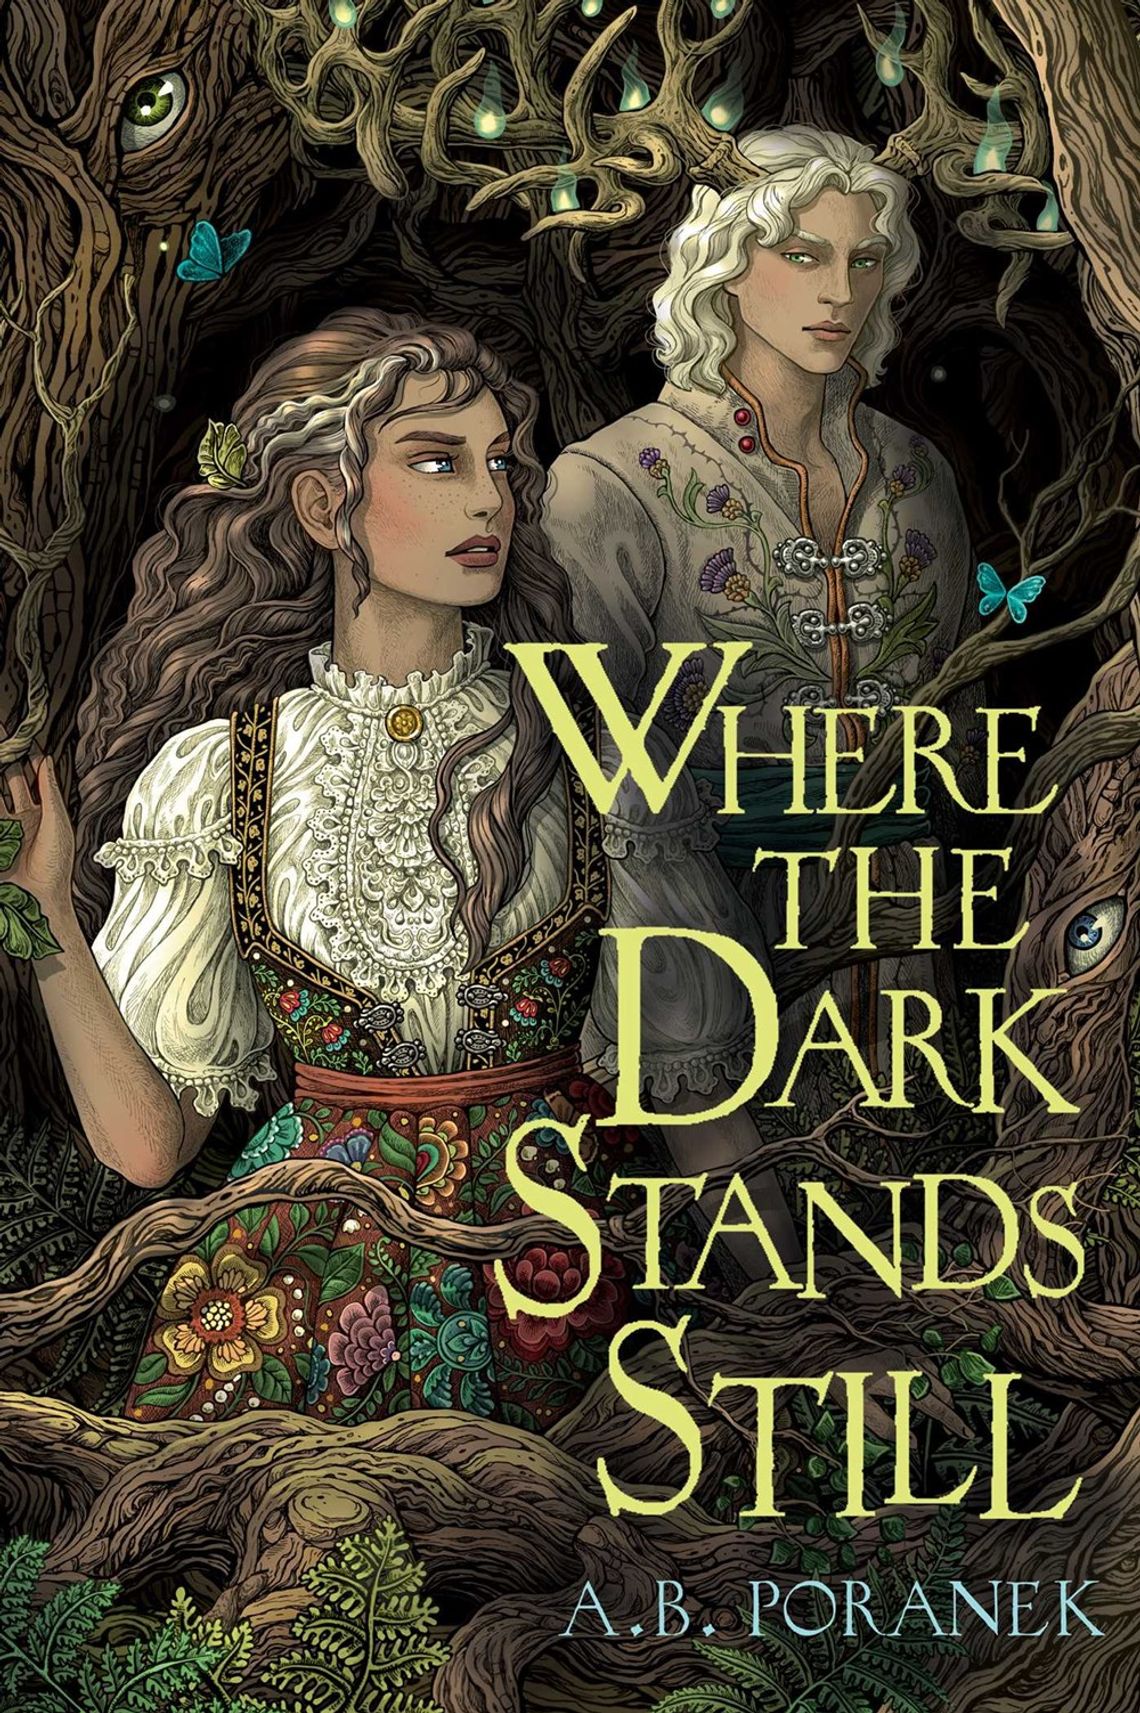 On the shelf: The importance of fantasy literature in the classroom